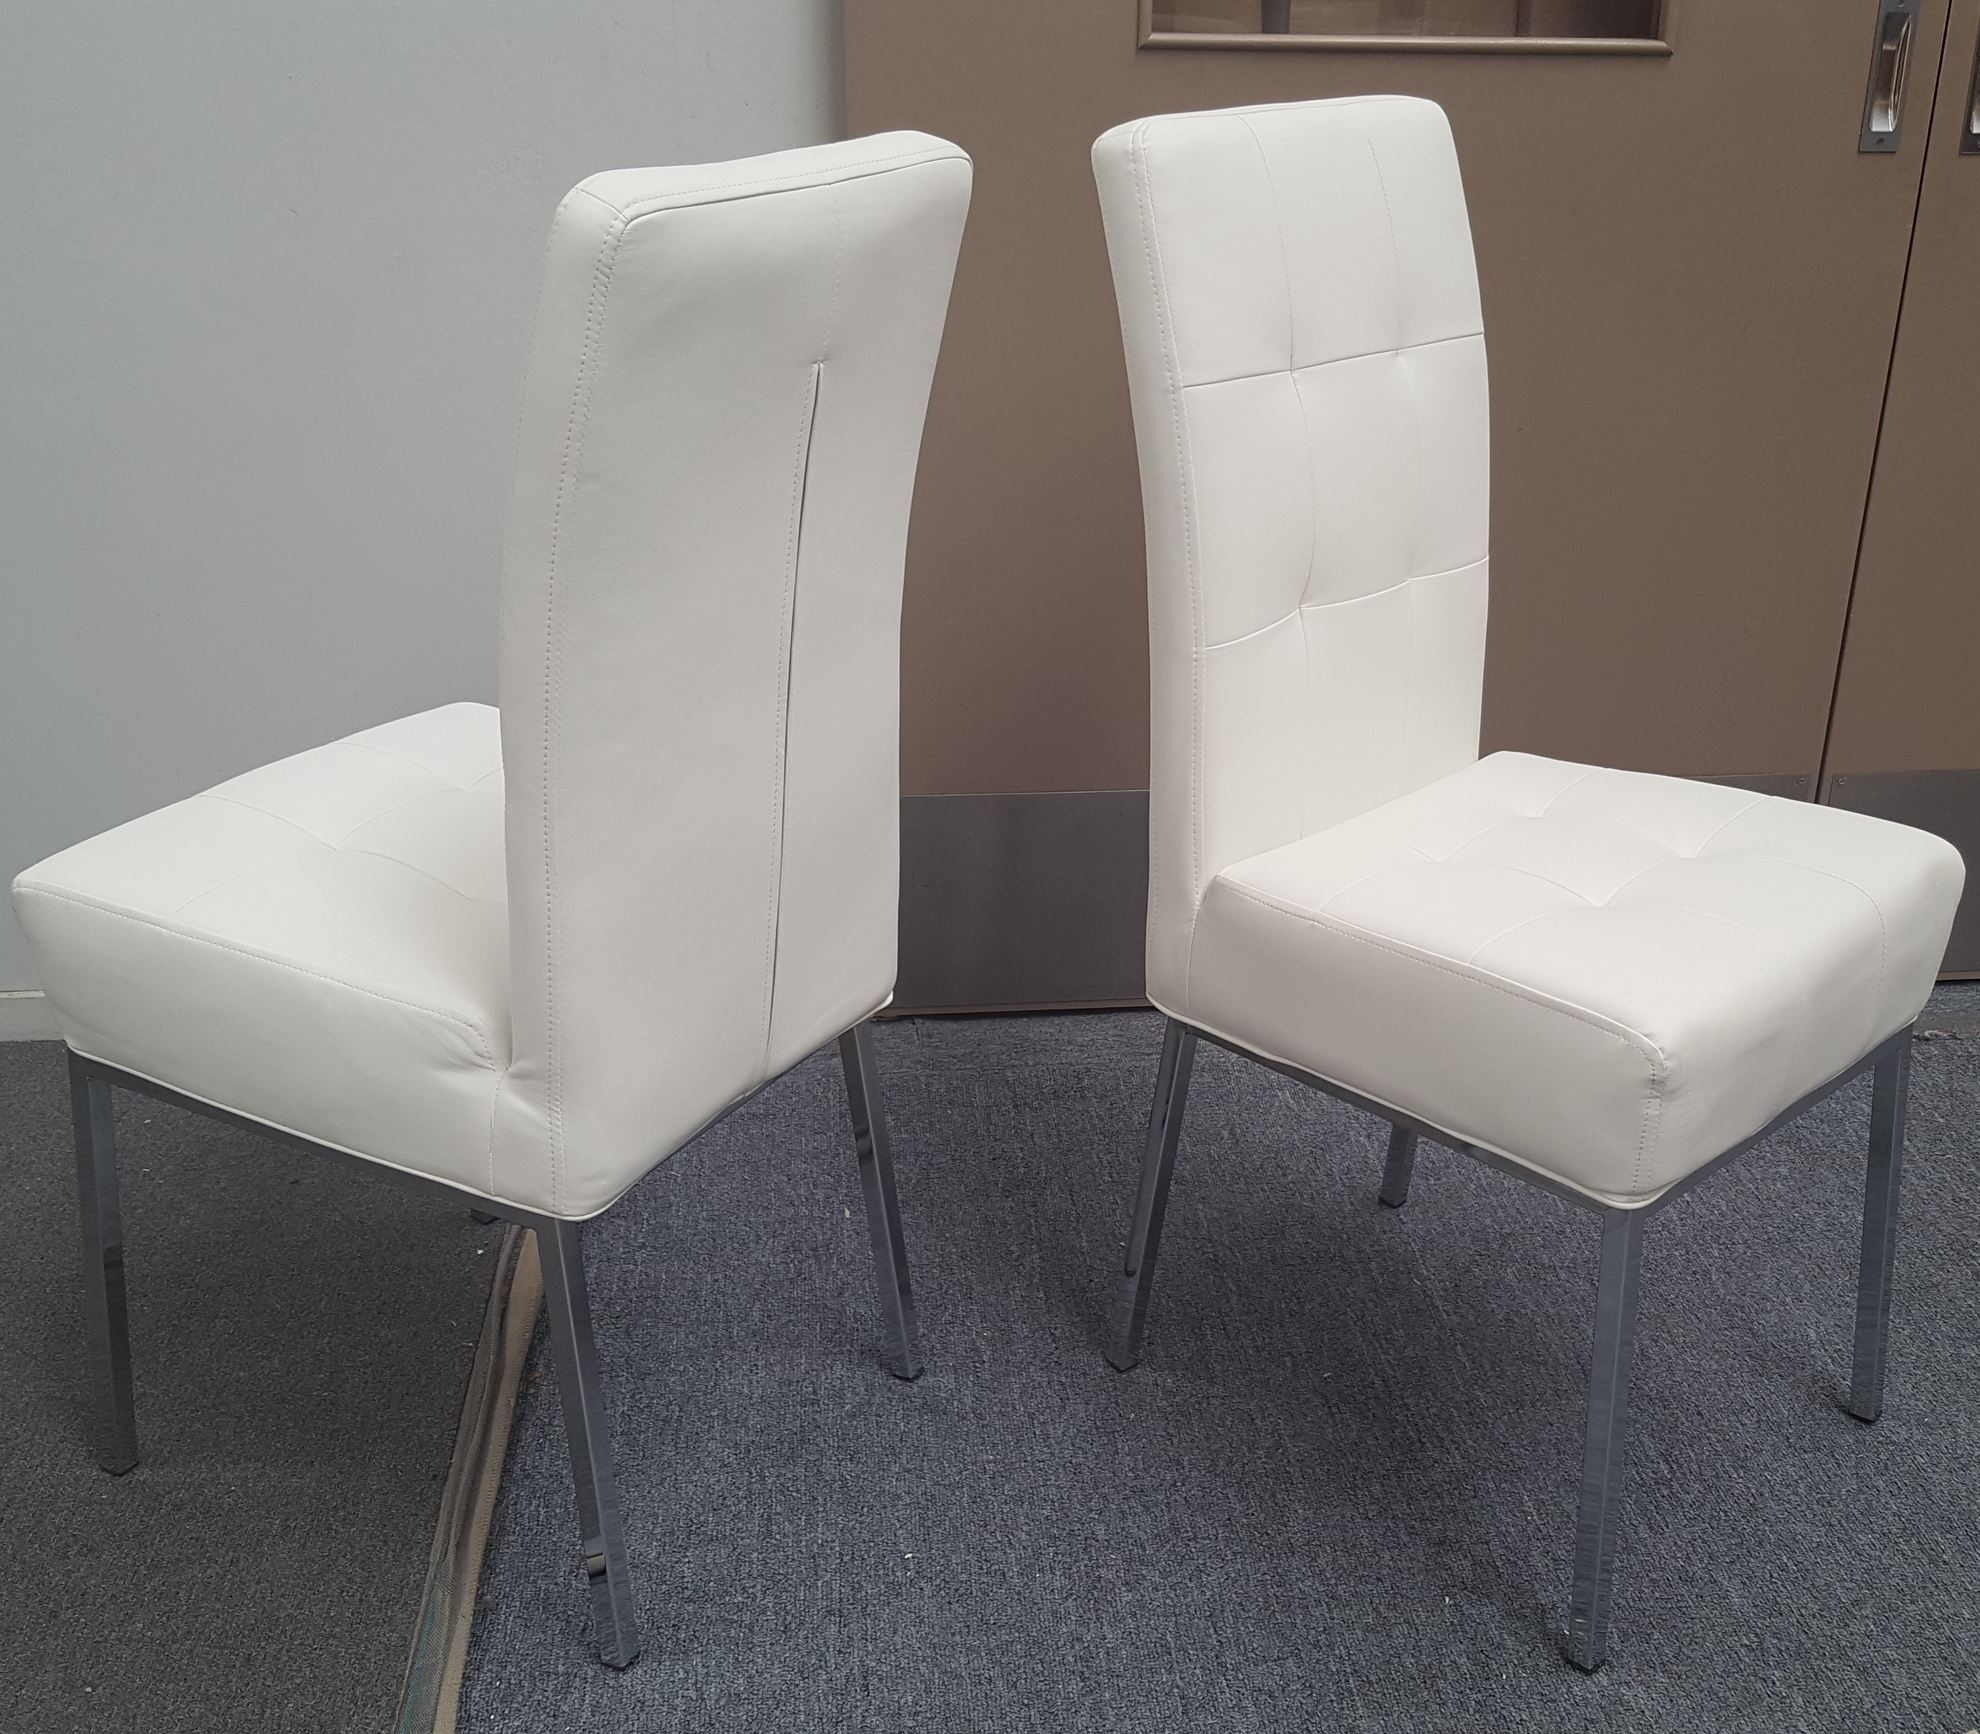 Nobel Dining Chair White Pu Leather, Dining Chairs White Leather